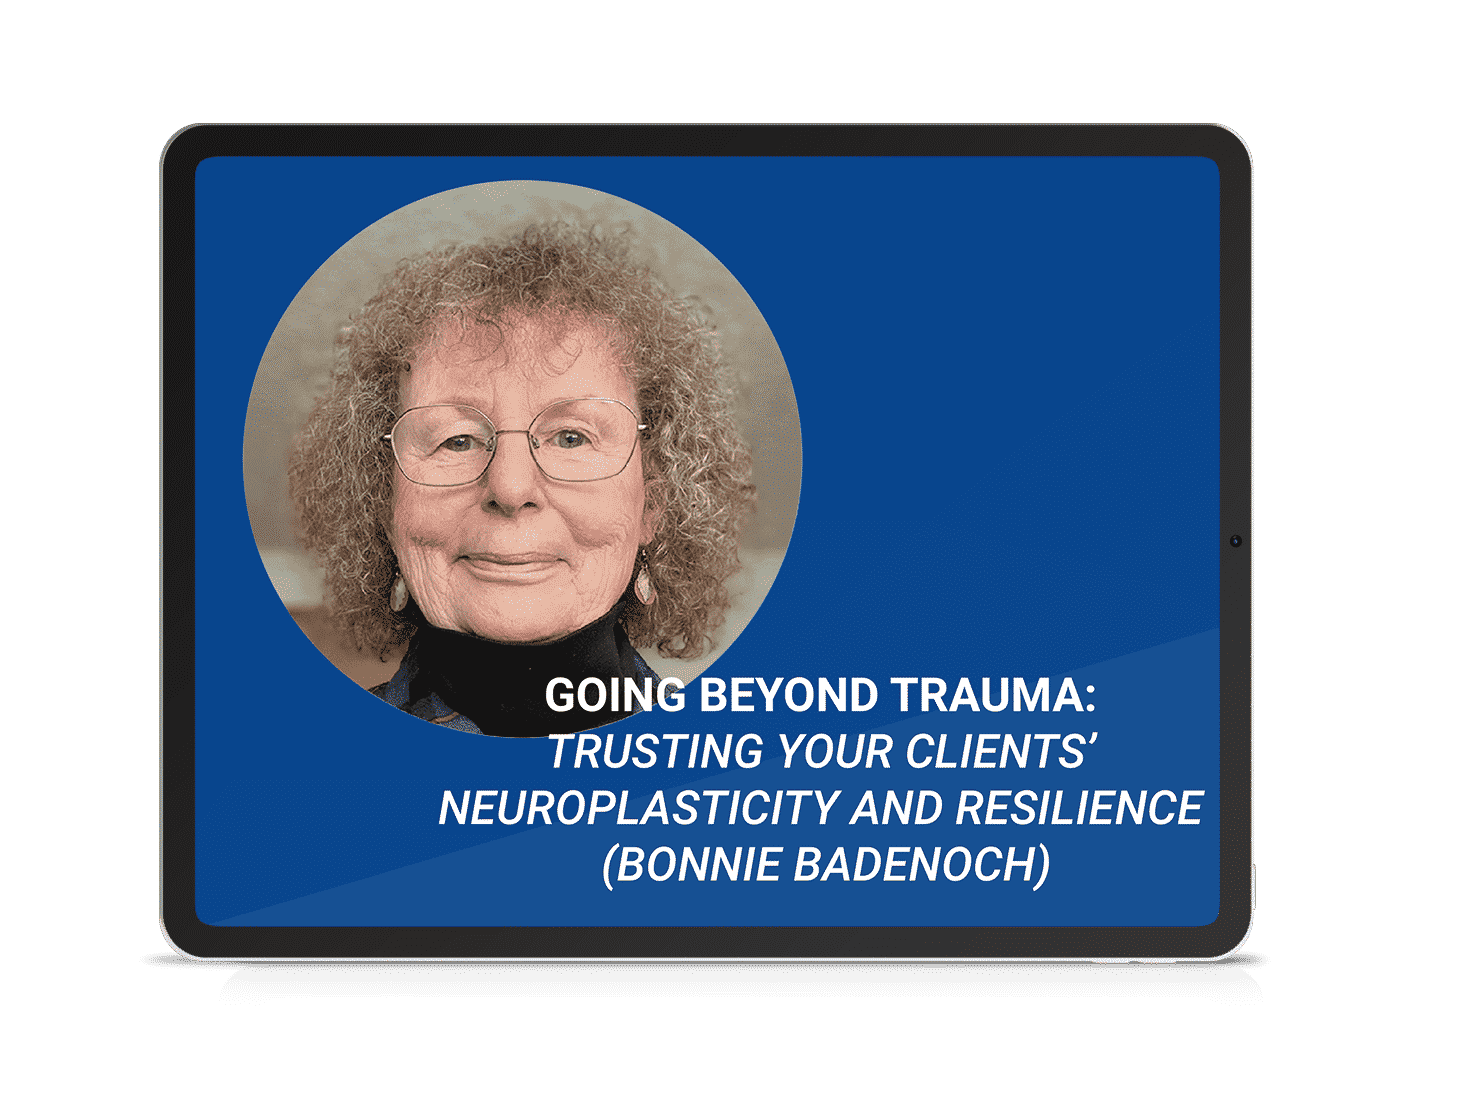 1. Going Beyond Trauma Trusting your Clients Neuroplasticity and Resilience (Bonnie Badenoch)_2